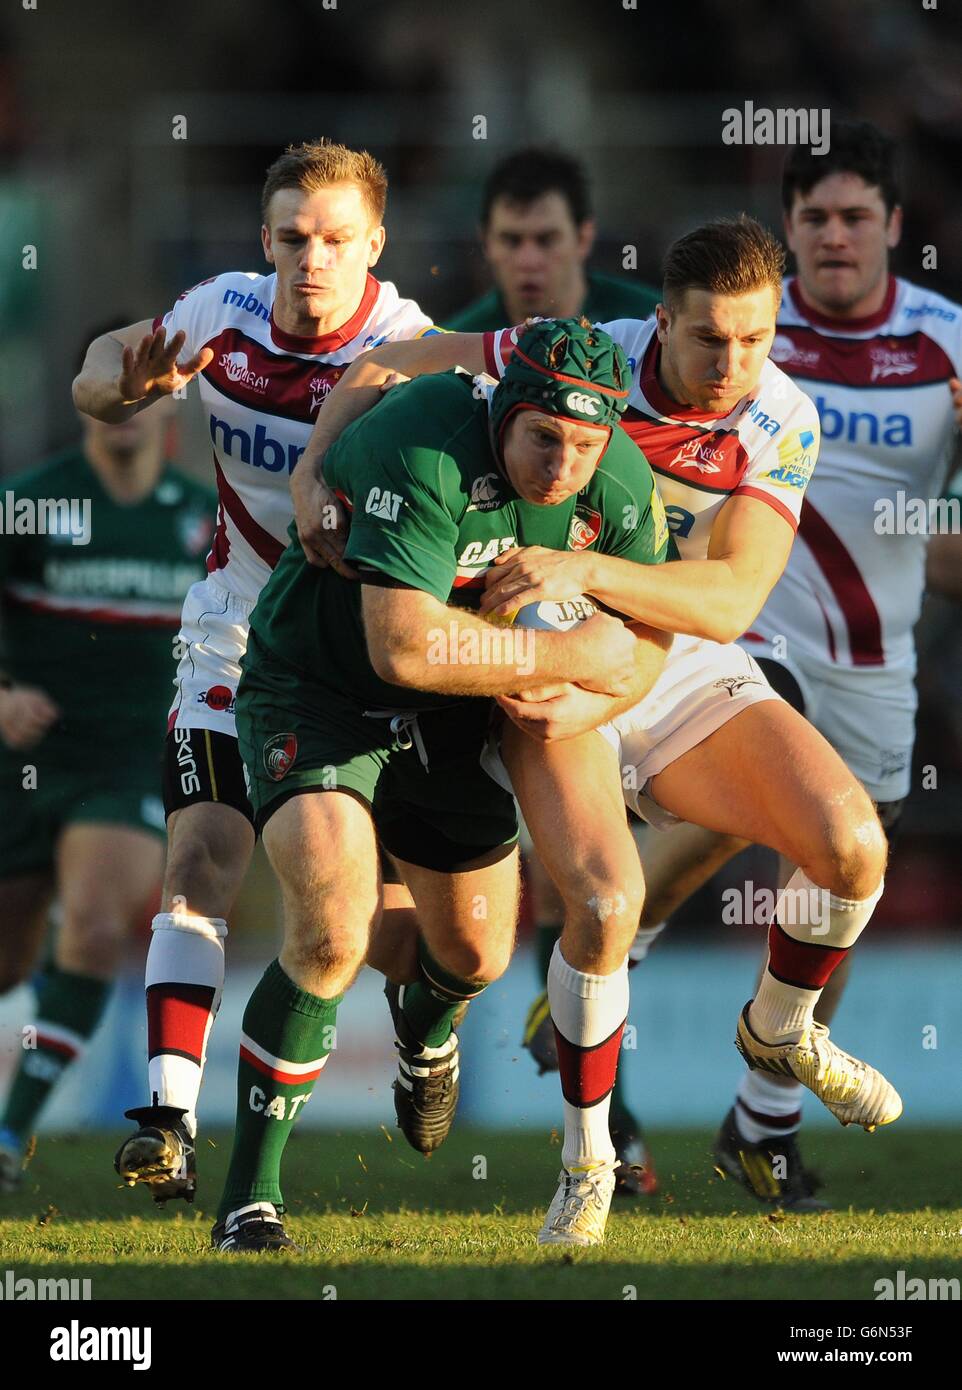 Rugby Union - Aviva Premiership - Leicester Tigers v vendita squali - Welford Road Foto Stock